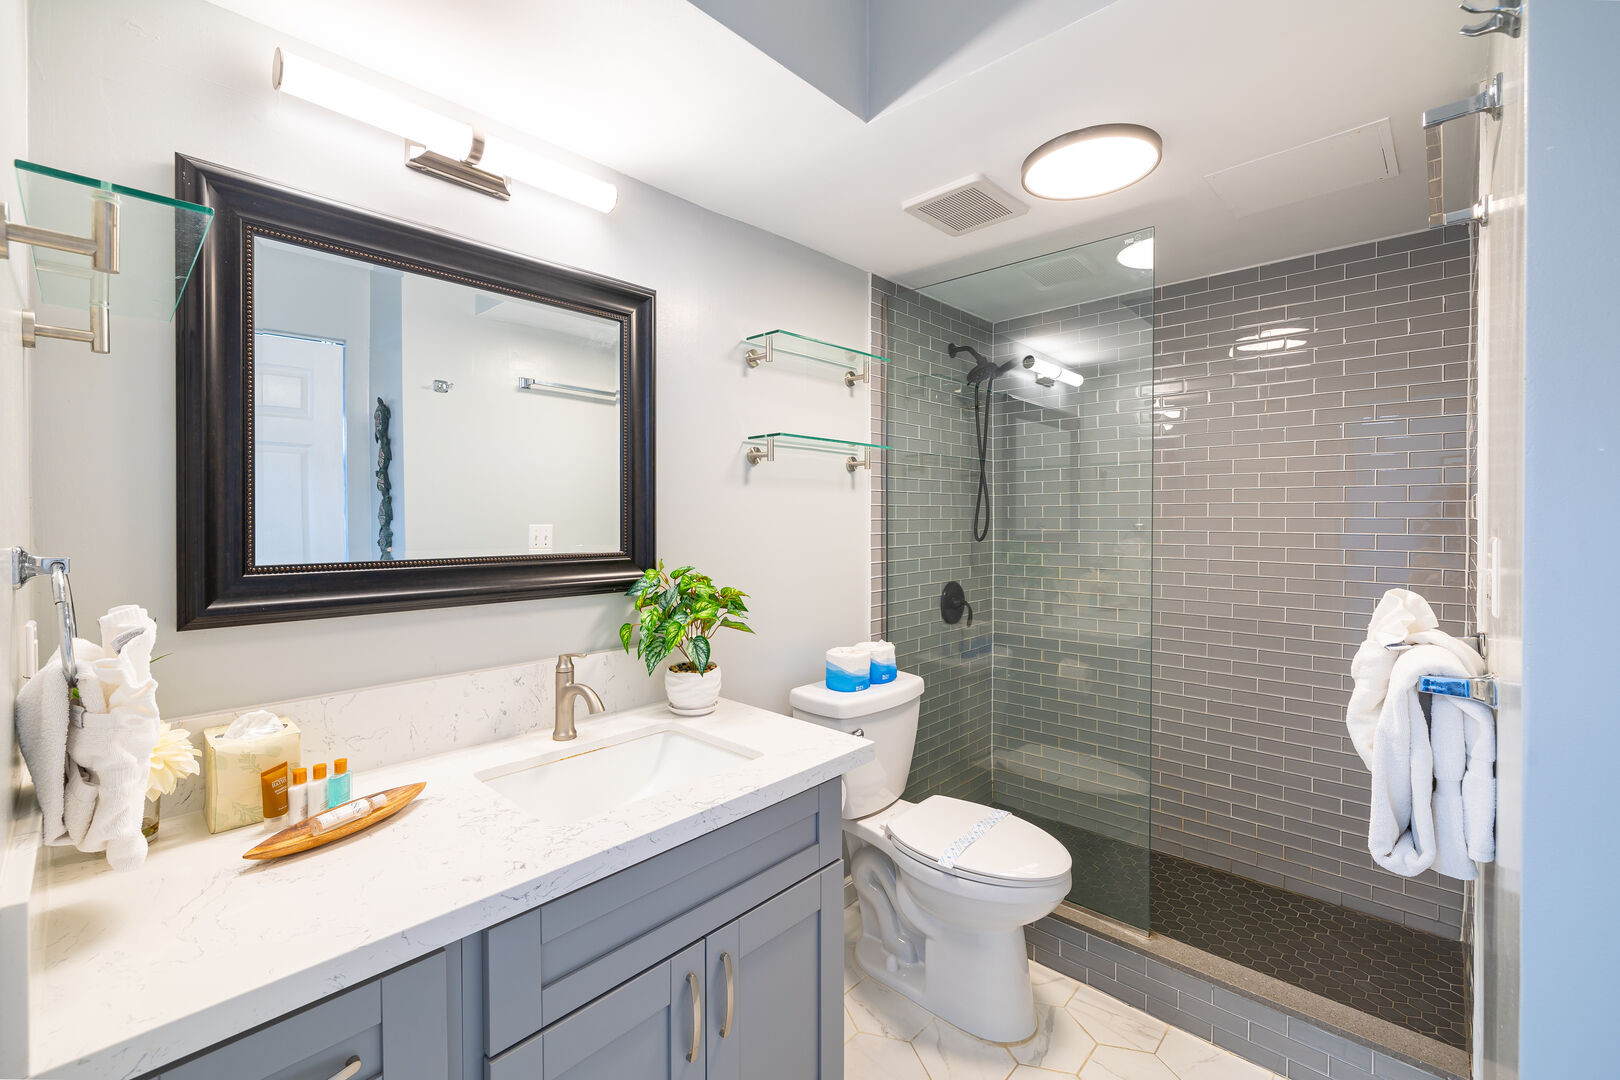 Refresh yourself in the bathroom with walk in shower!